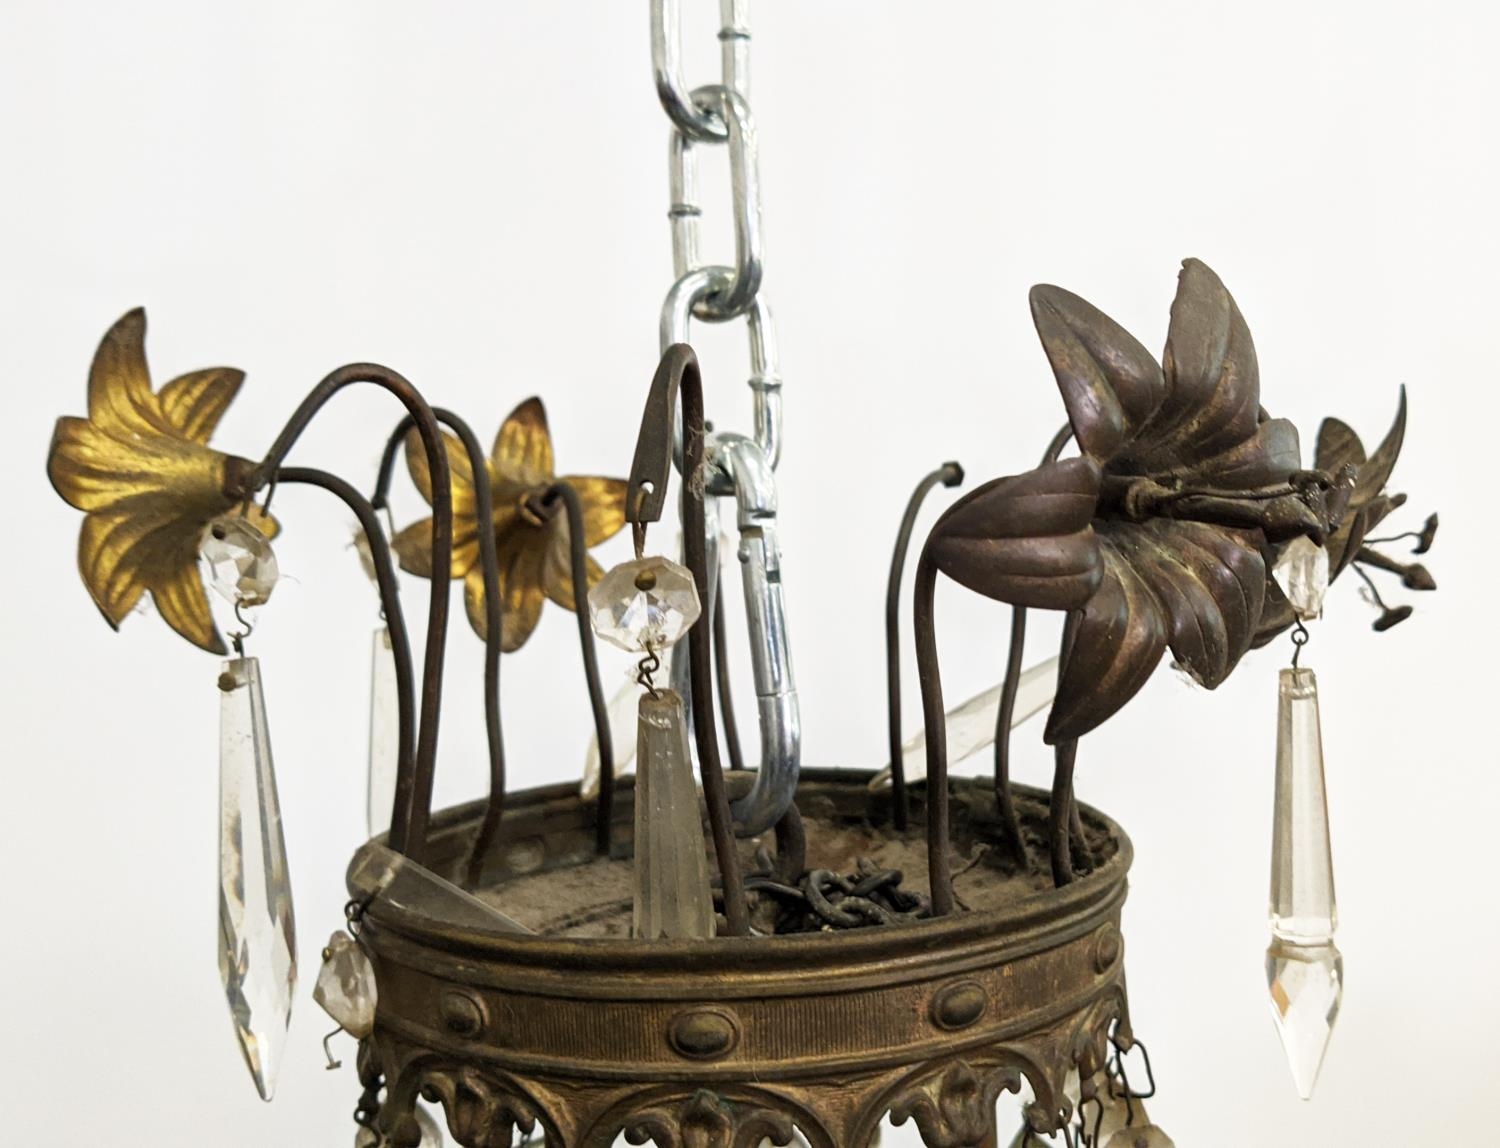 CHANDELIER, late 19th/early 20th century French, six branch, 100cm H approx. - Image 7 of 12